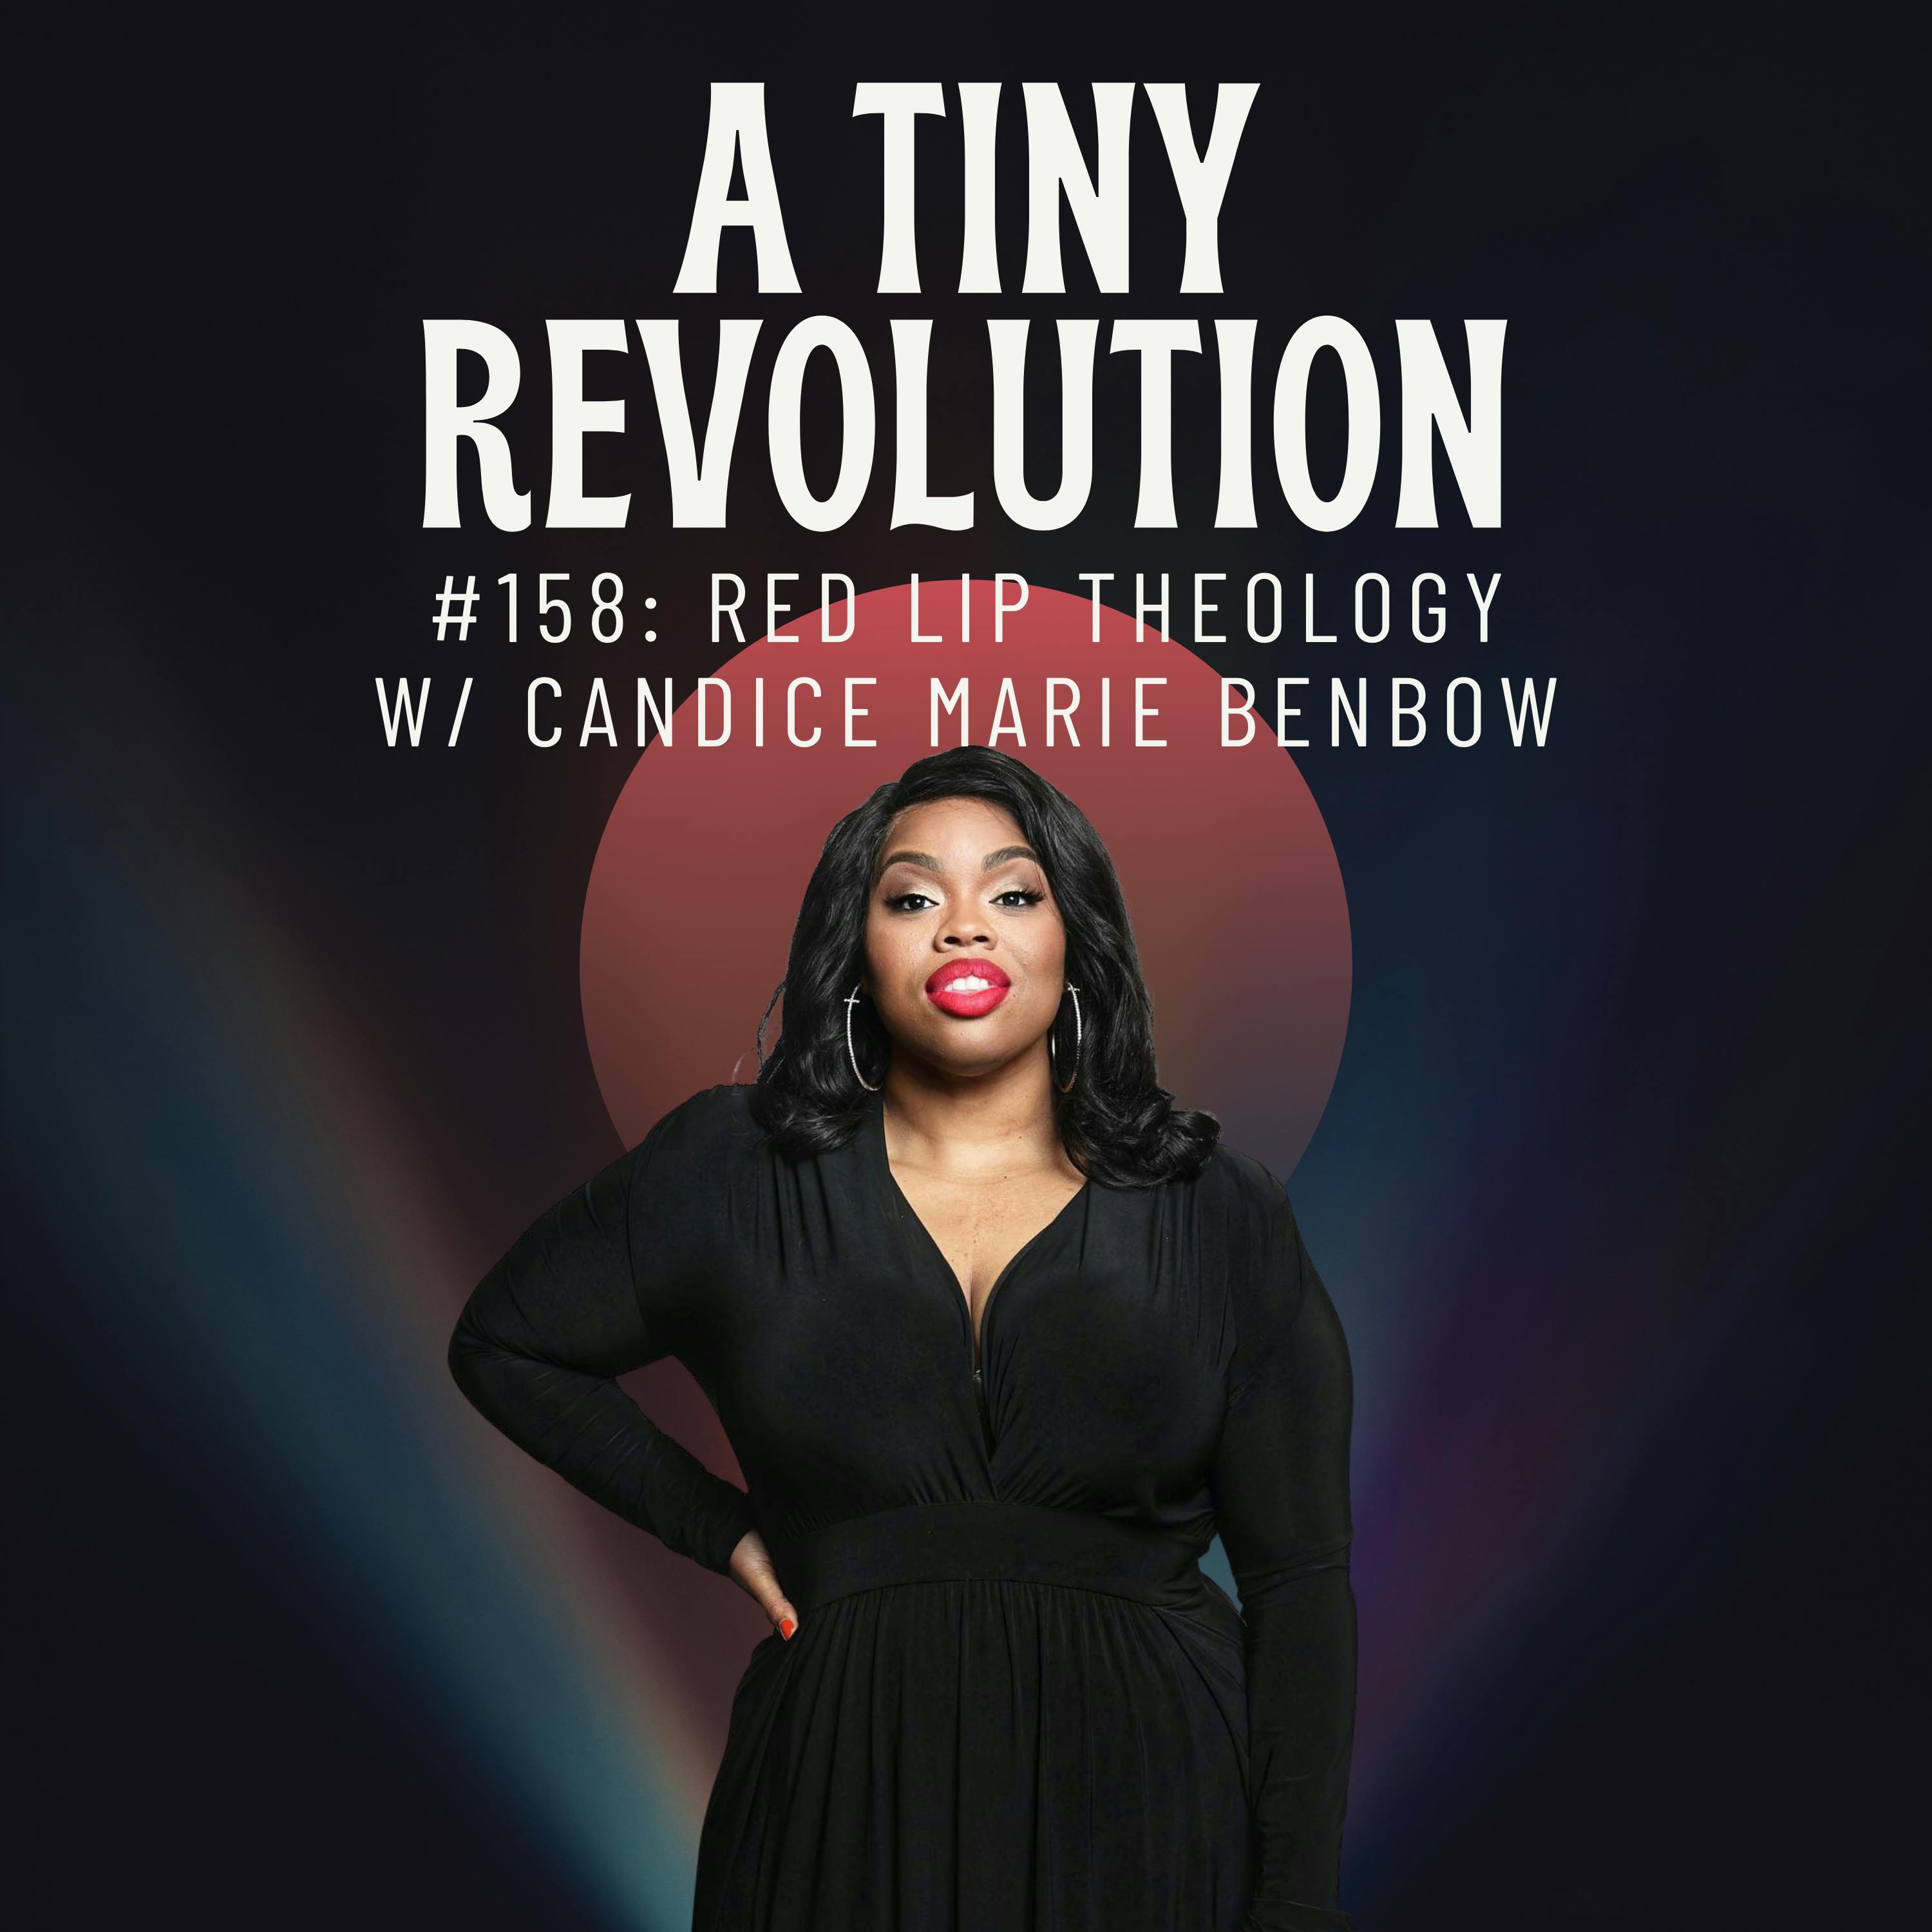 #158: Red Lip Theology, w/ Candice Marie Benbow